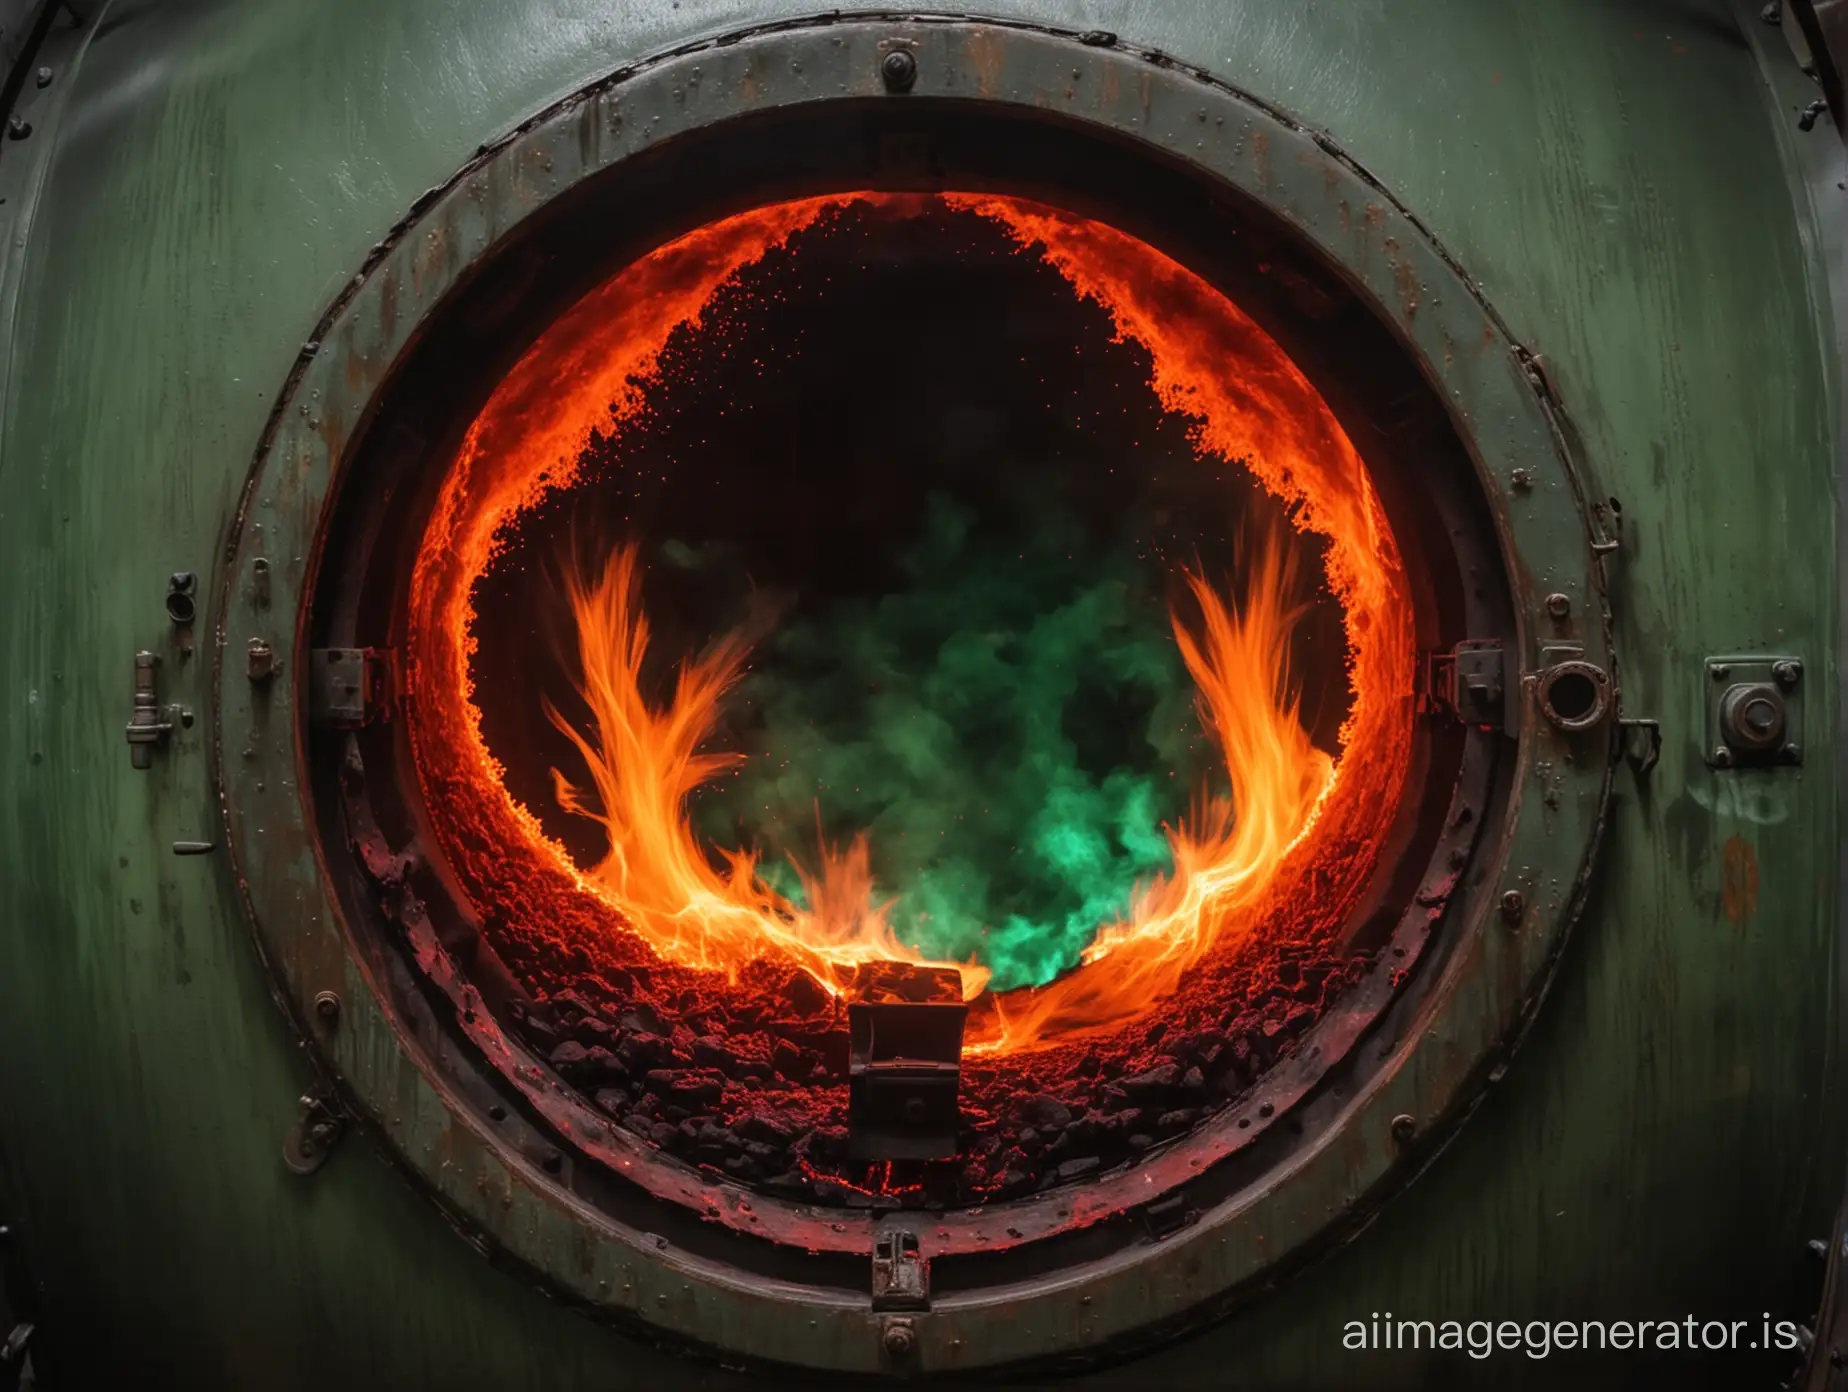 DnD green and red flames seen through a porthole of a boiler tank.